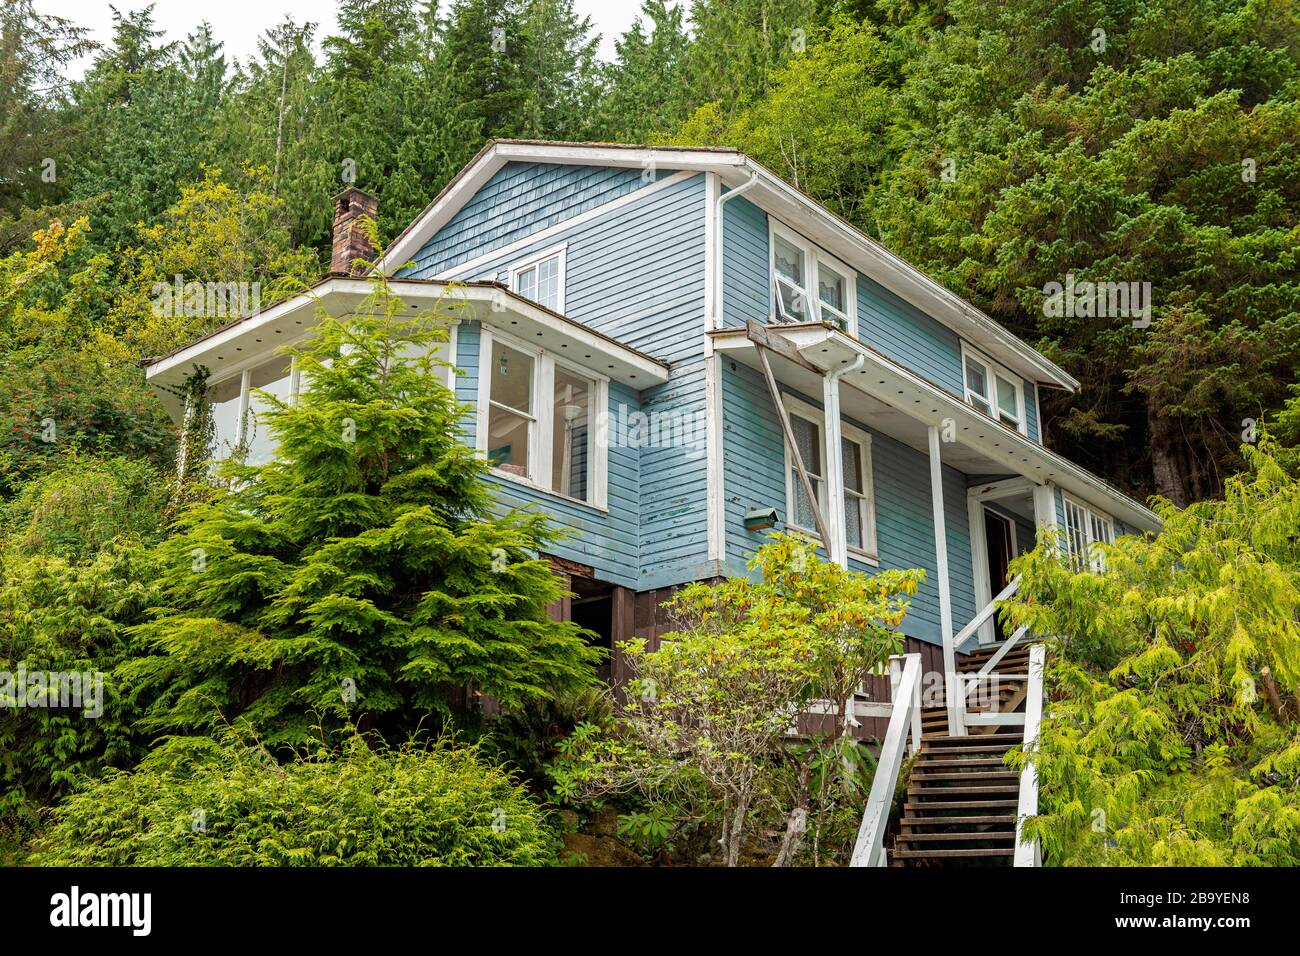 Housing in Telegraph Cove with wooden chalet style architecture on stilts in the woods, Vancouver Island, British Columbia, Canada. Stock Photo